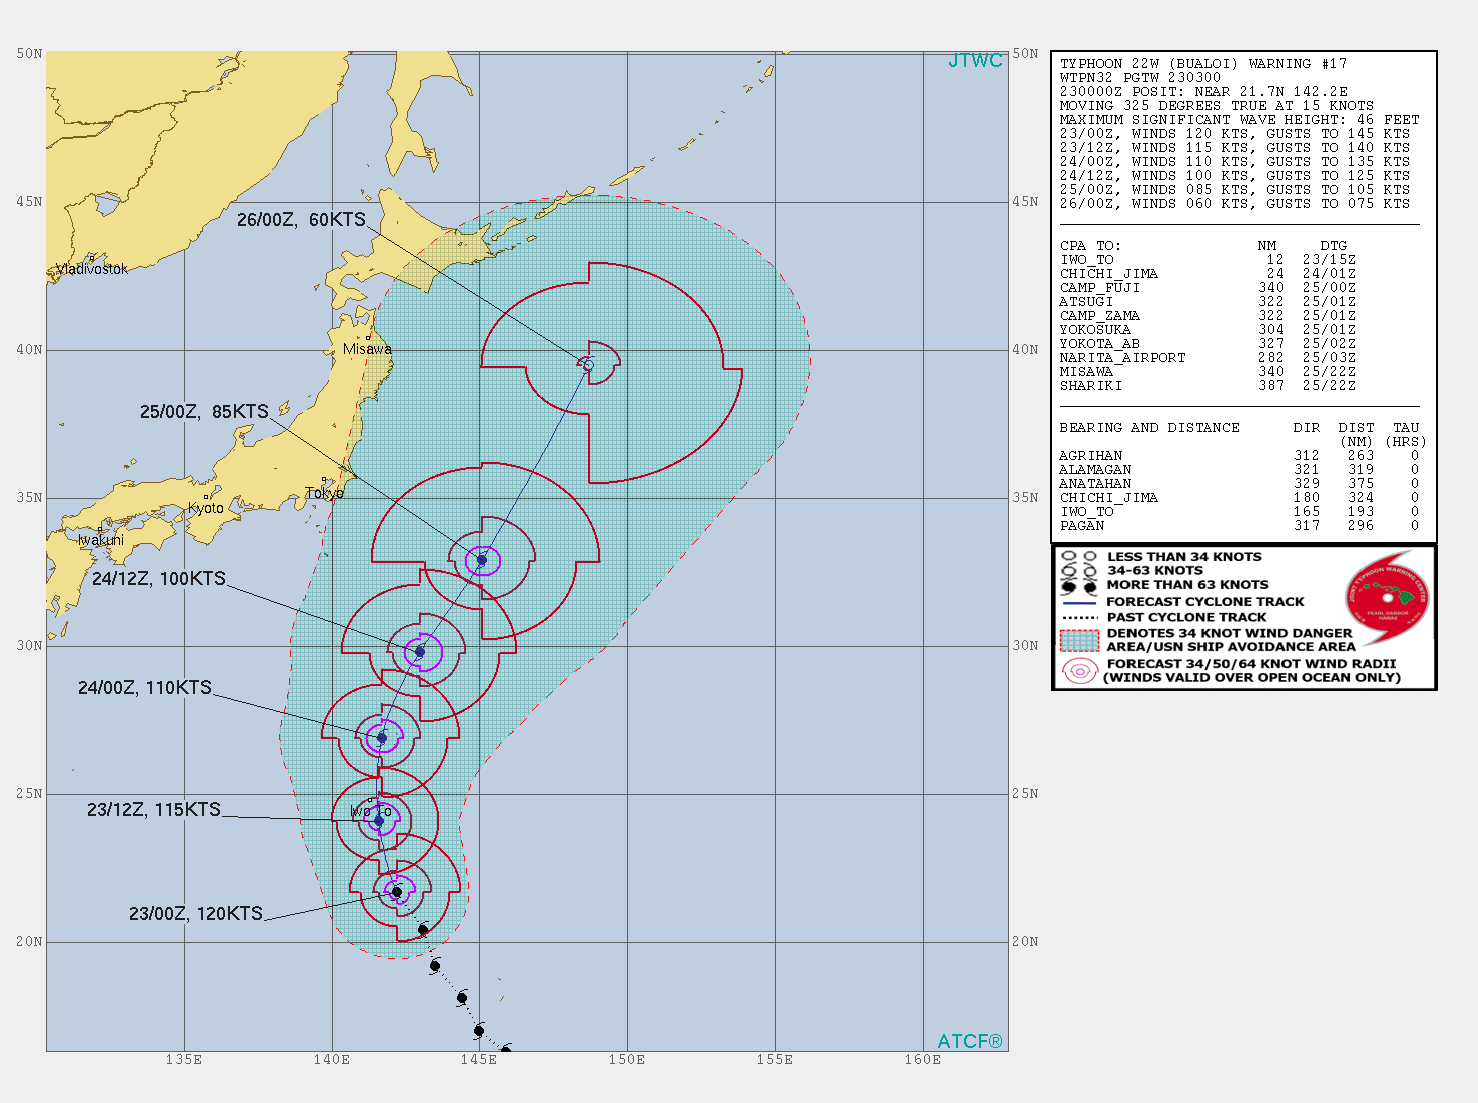 INTENSITY IS FORECAST TO FALL BELOW TYPHOON INTENSITY AFTER 48H